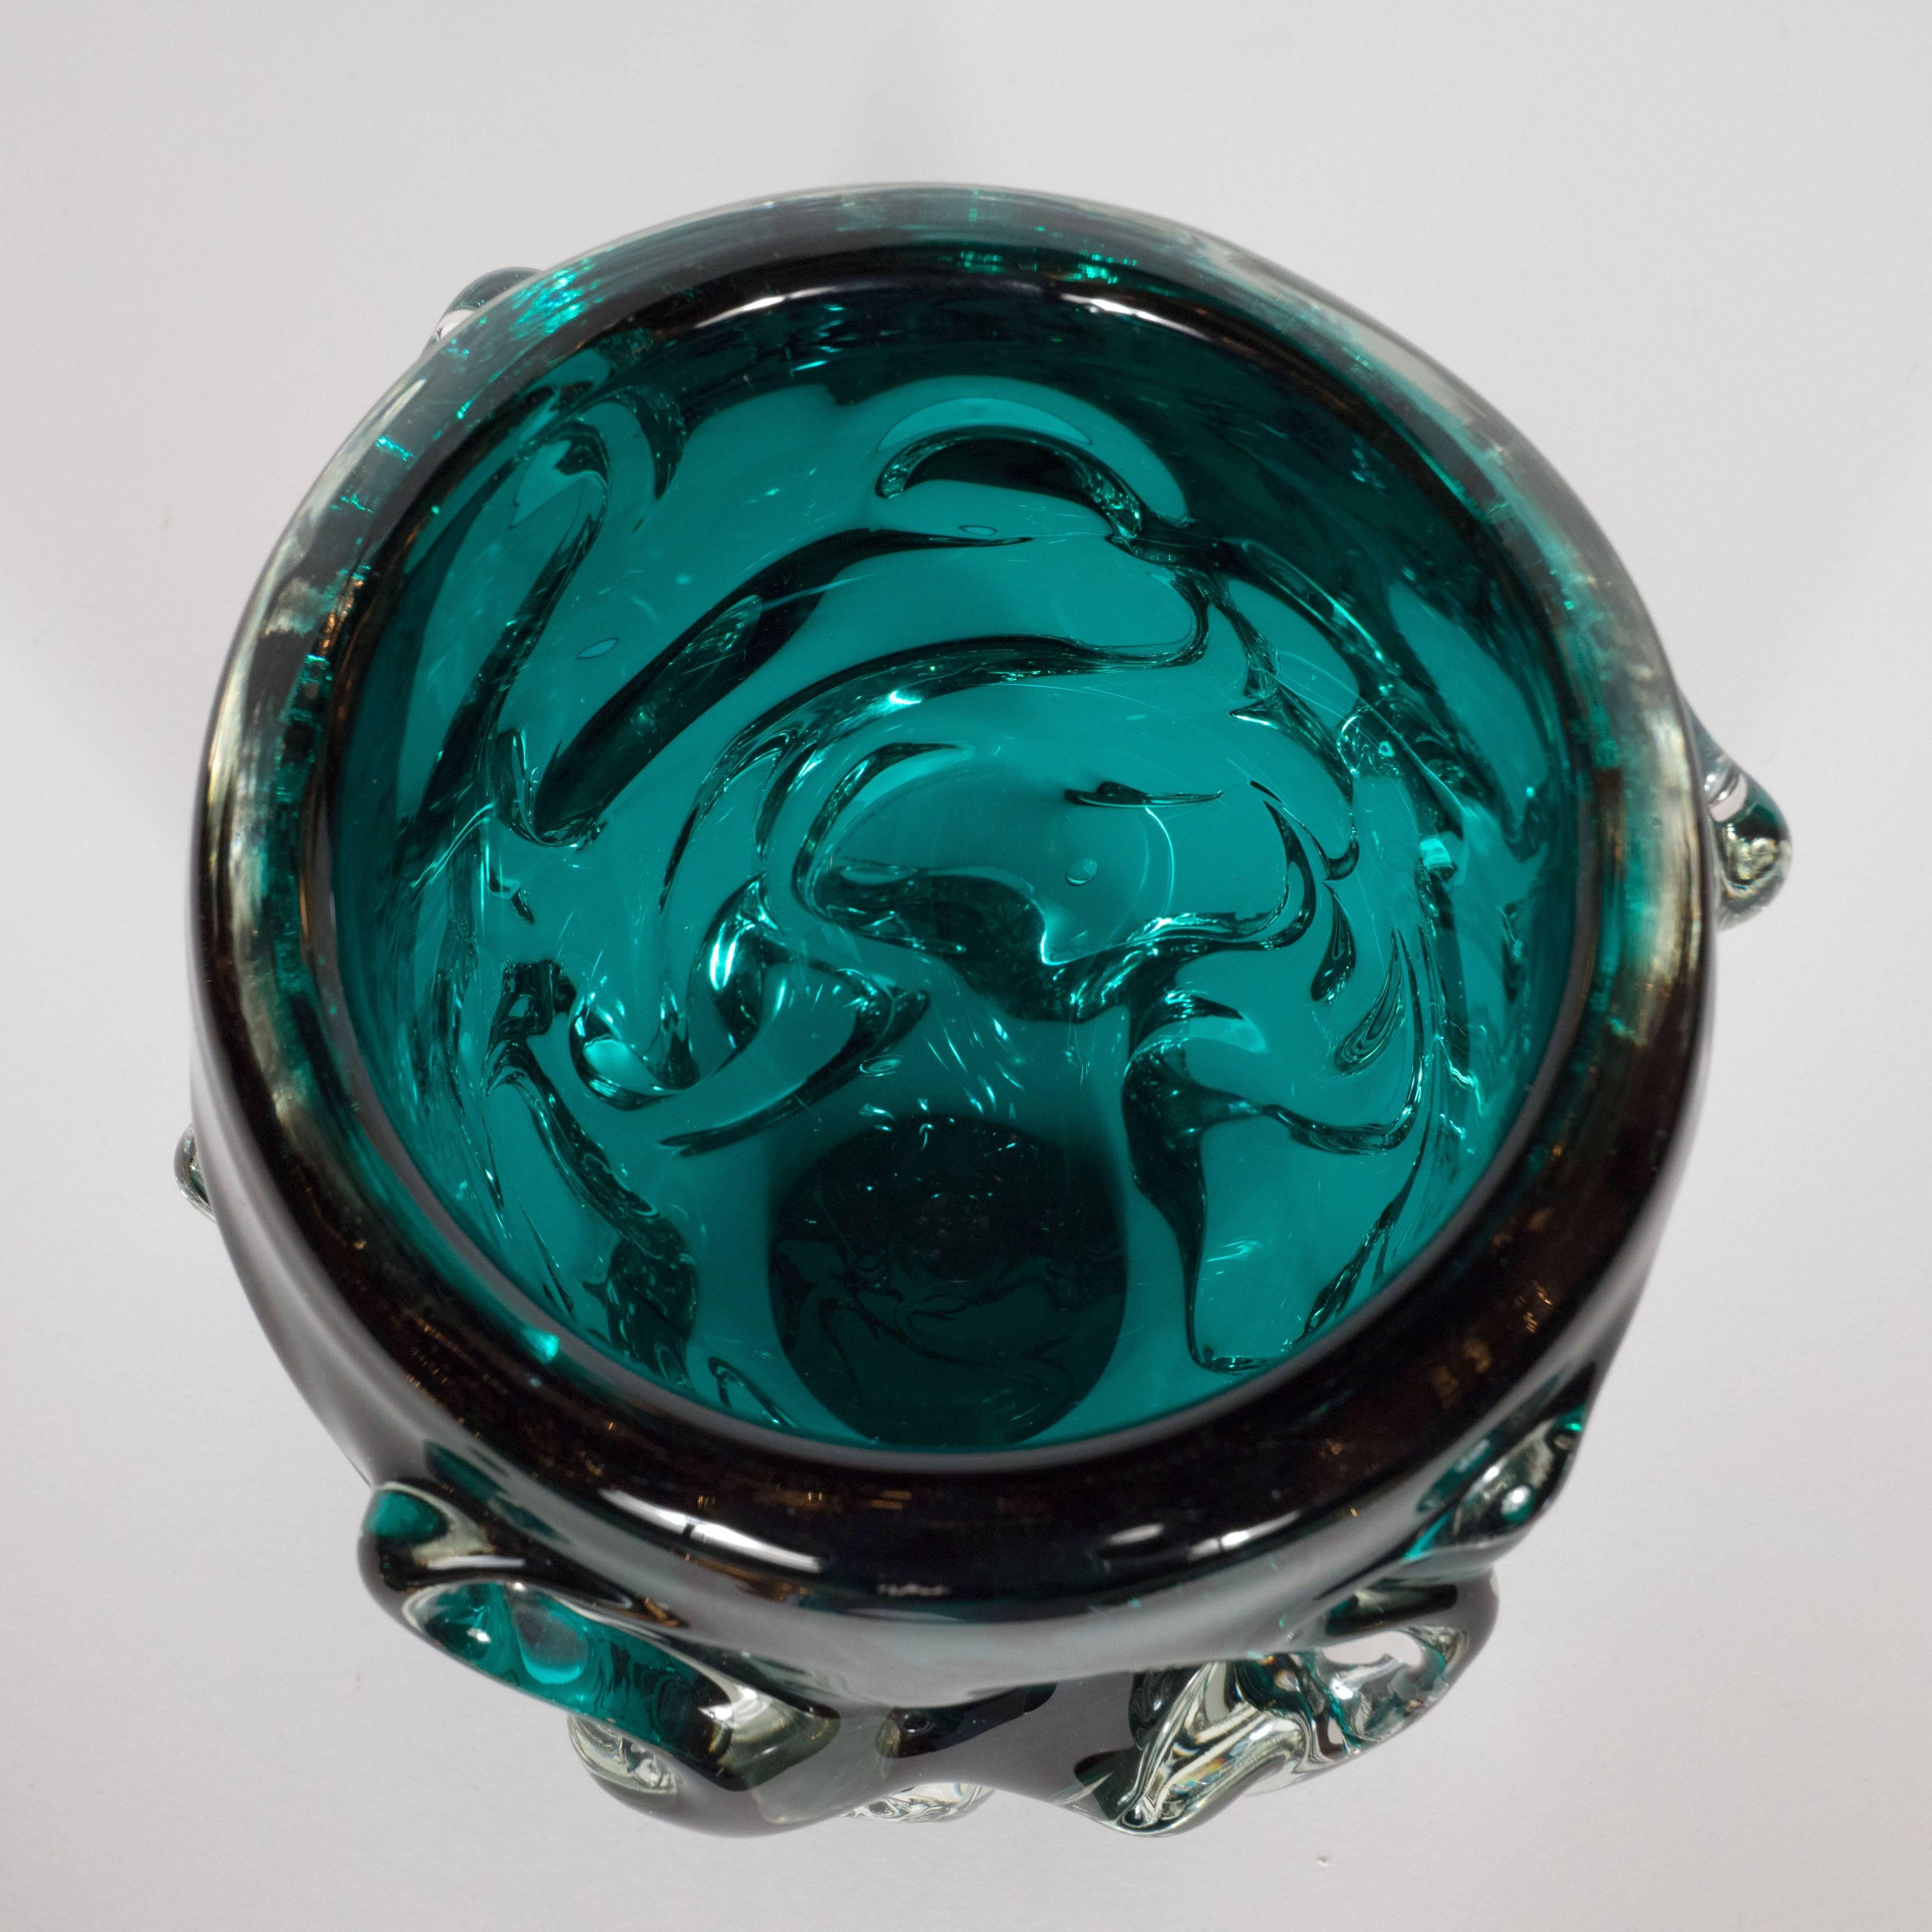 Italian Handblown Sculptural Murano Vase with in Translucent and Teal Glass